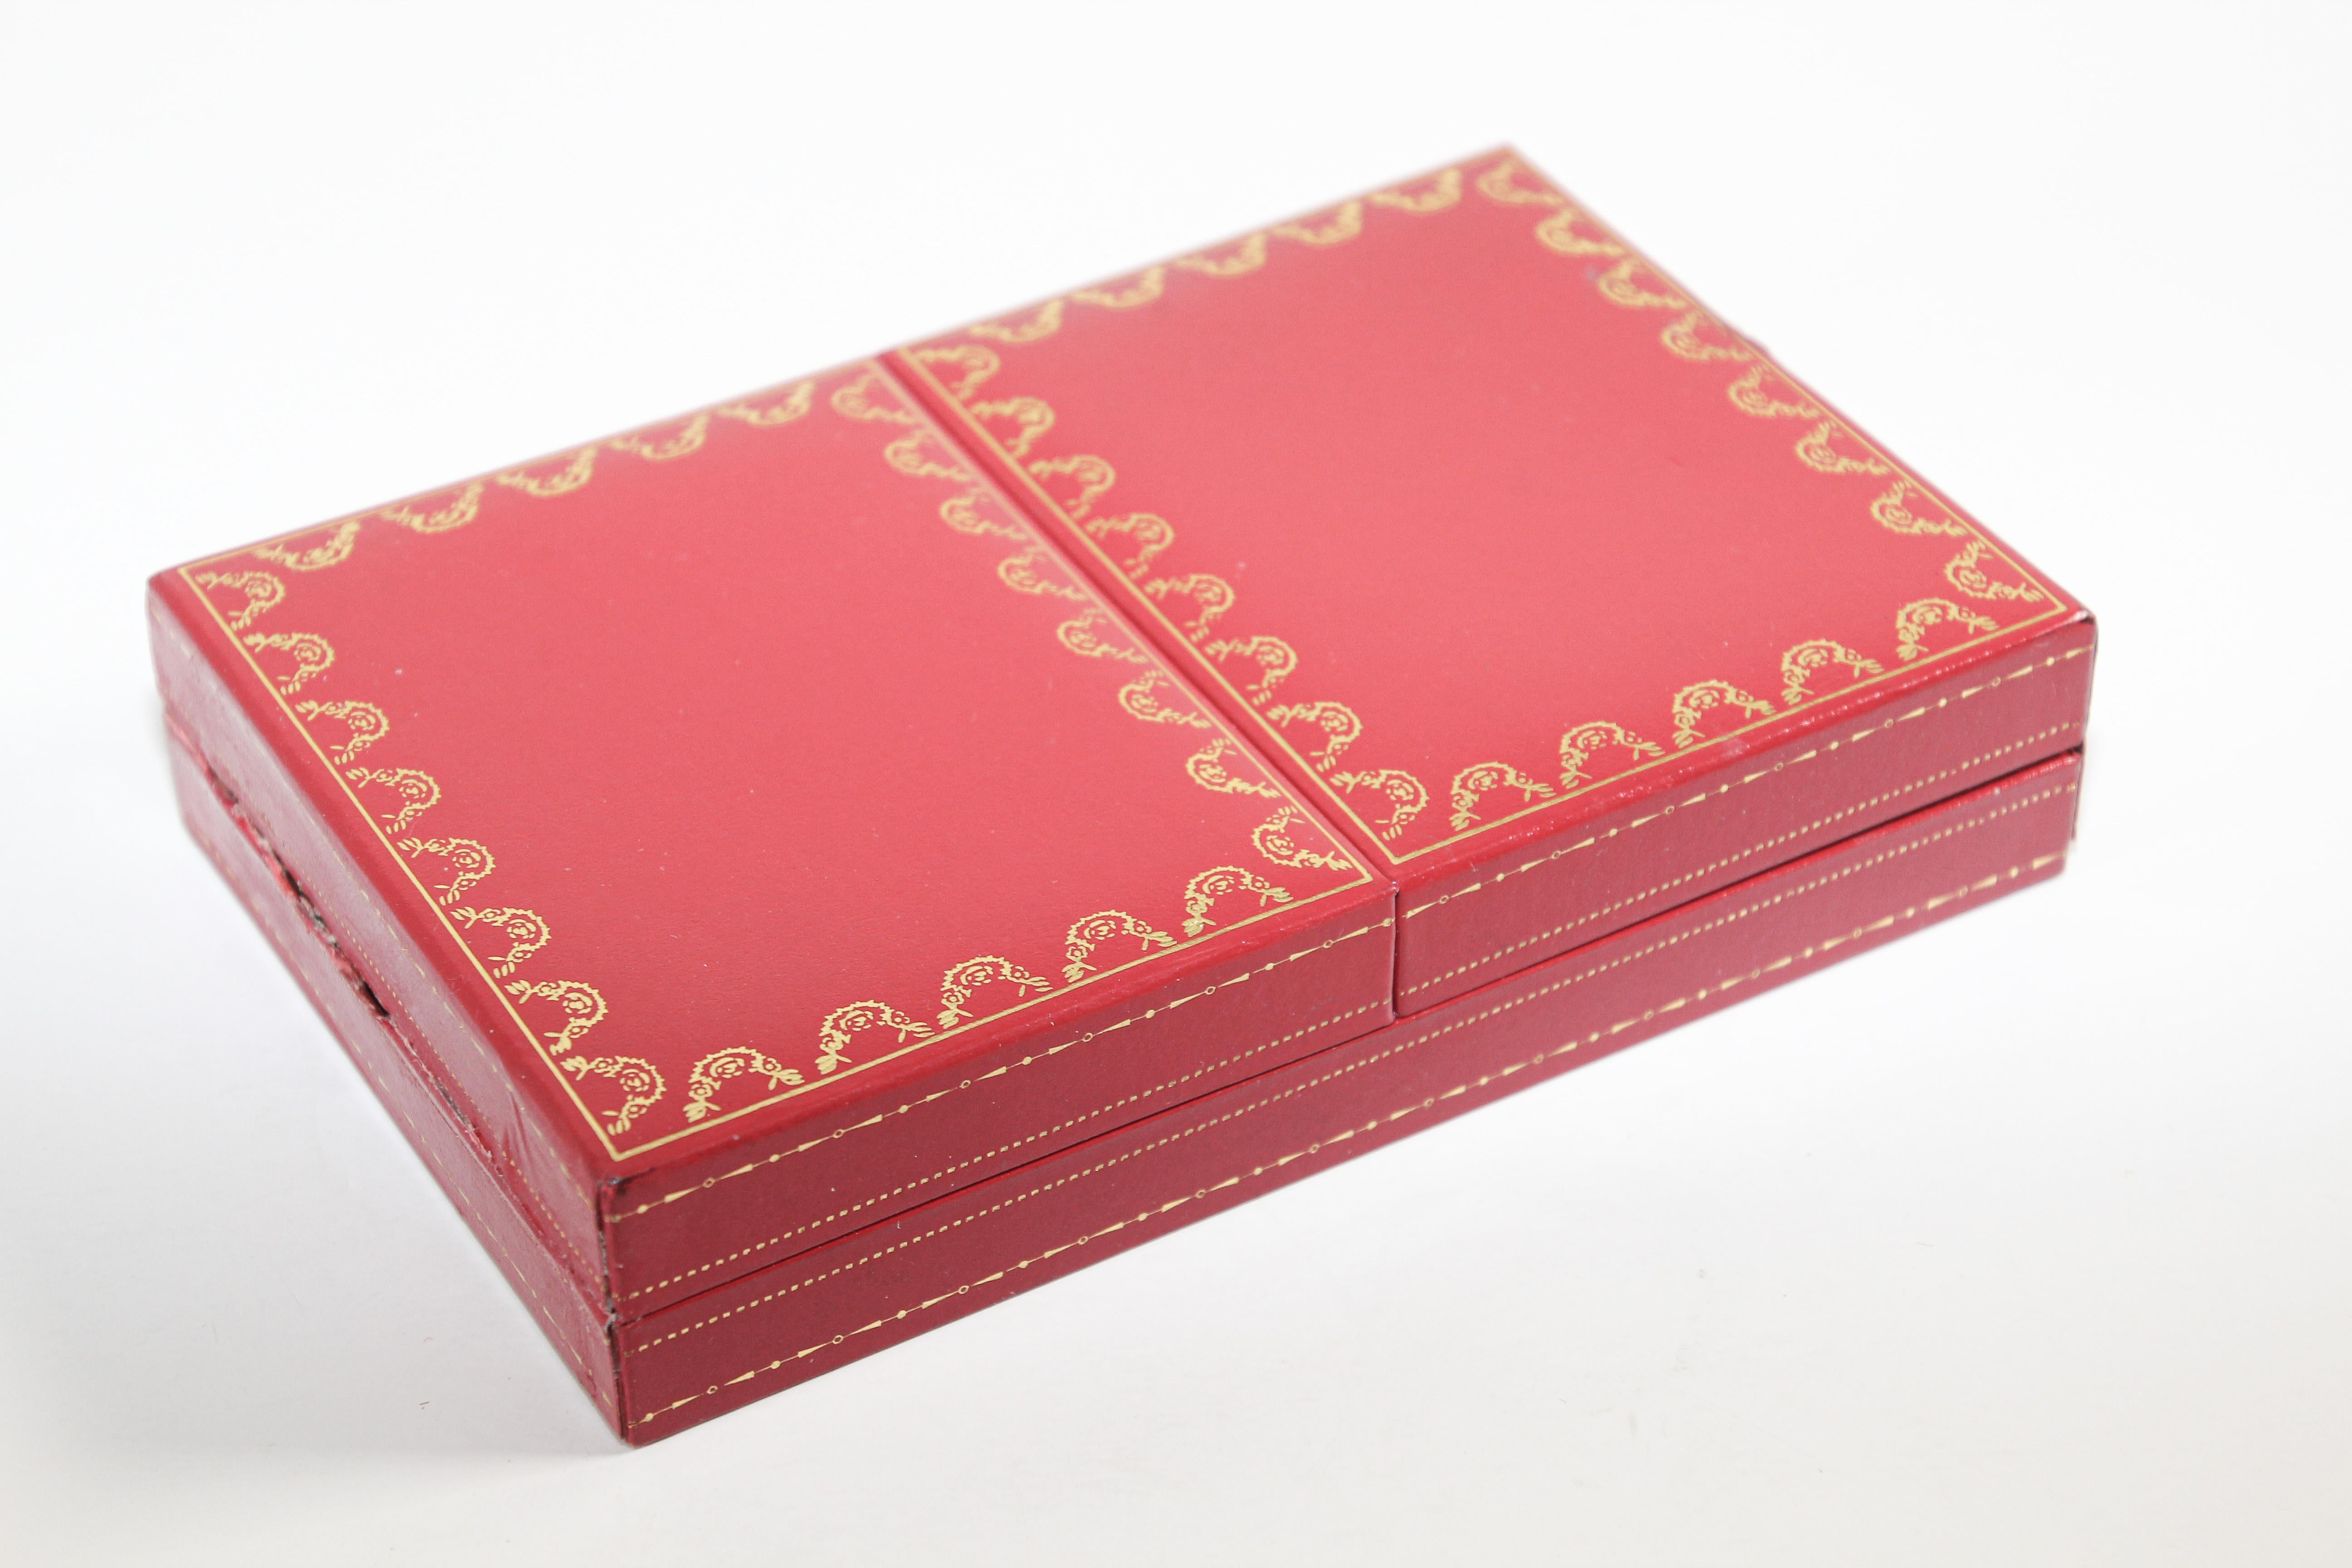 Cartier playing cards, one deck plus joker, poker, bridge playing cards in Cartier red 2-doors case.
Les Must De Cartier playing cards were only sold from 1972-1976.
This silk-lined box of cards with 18-karat gilded corners, printed with the Les